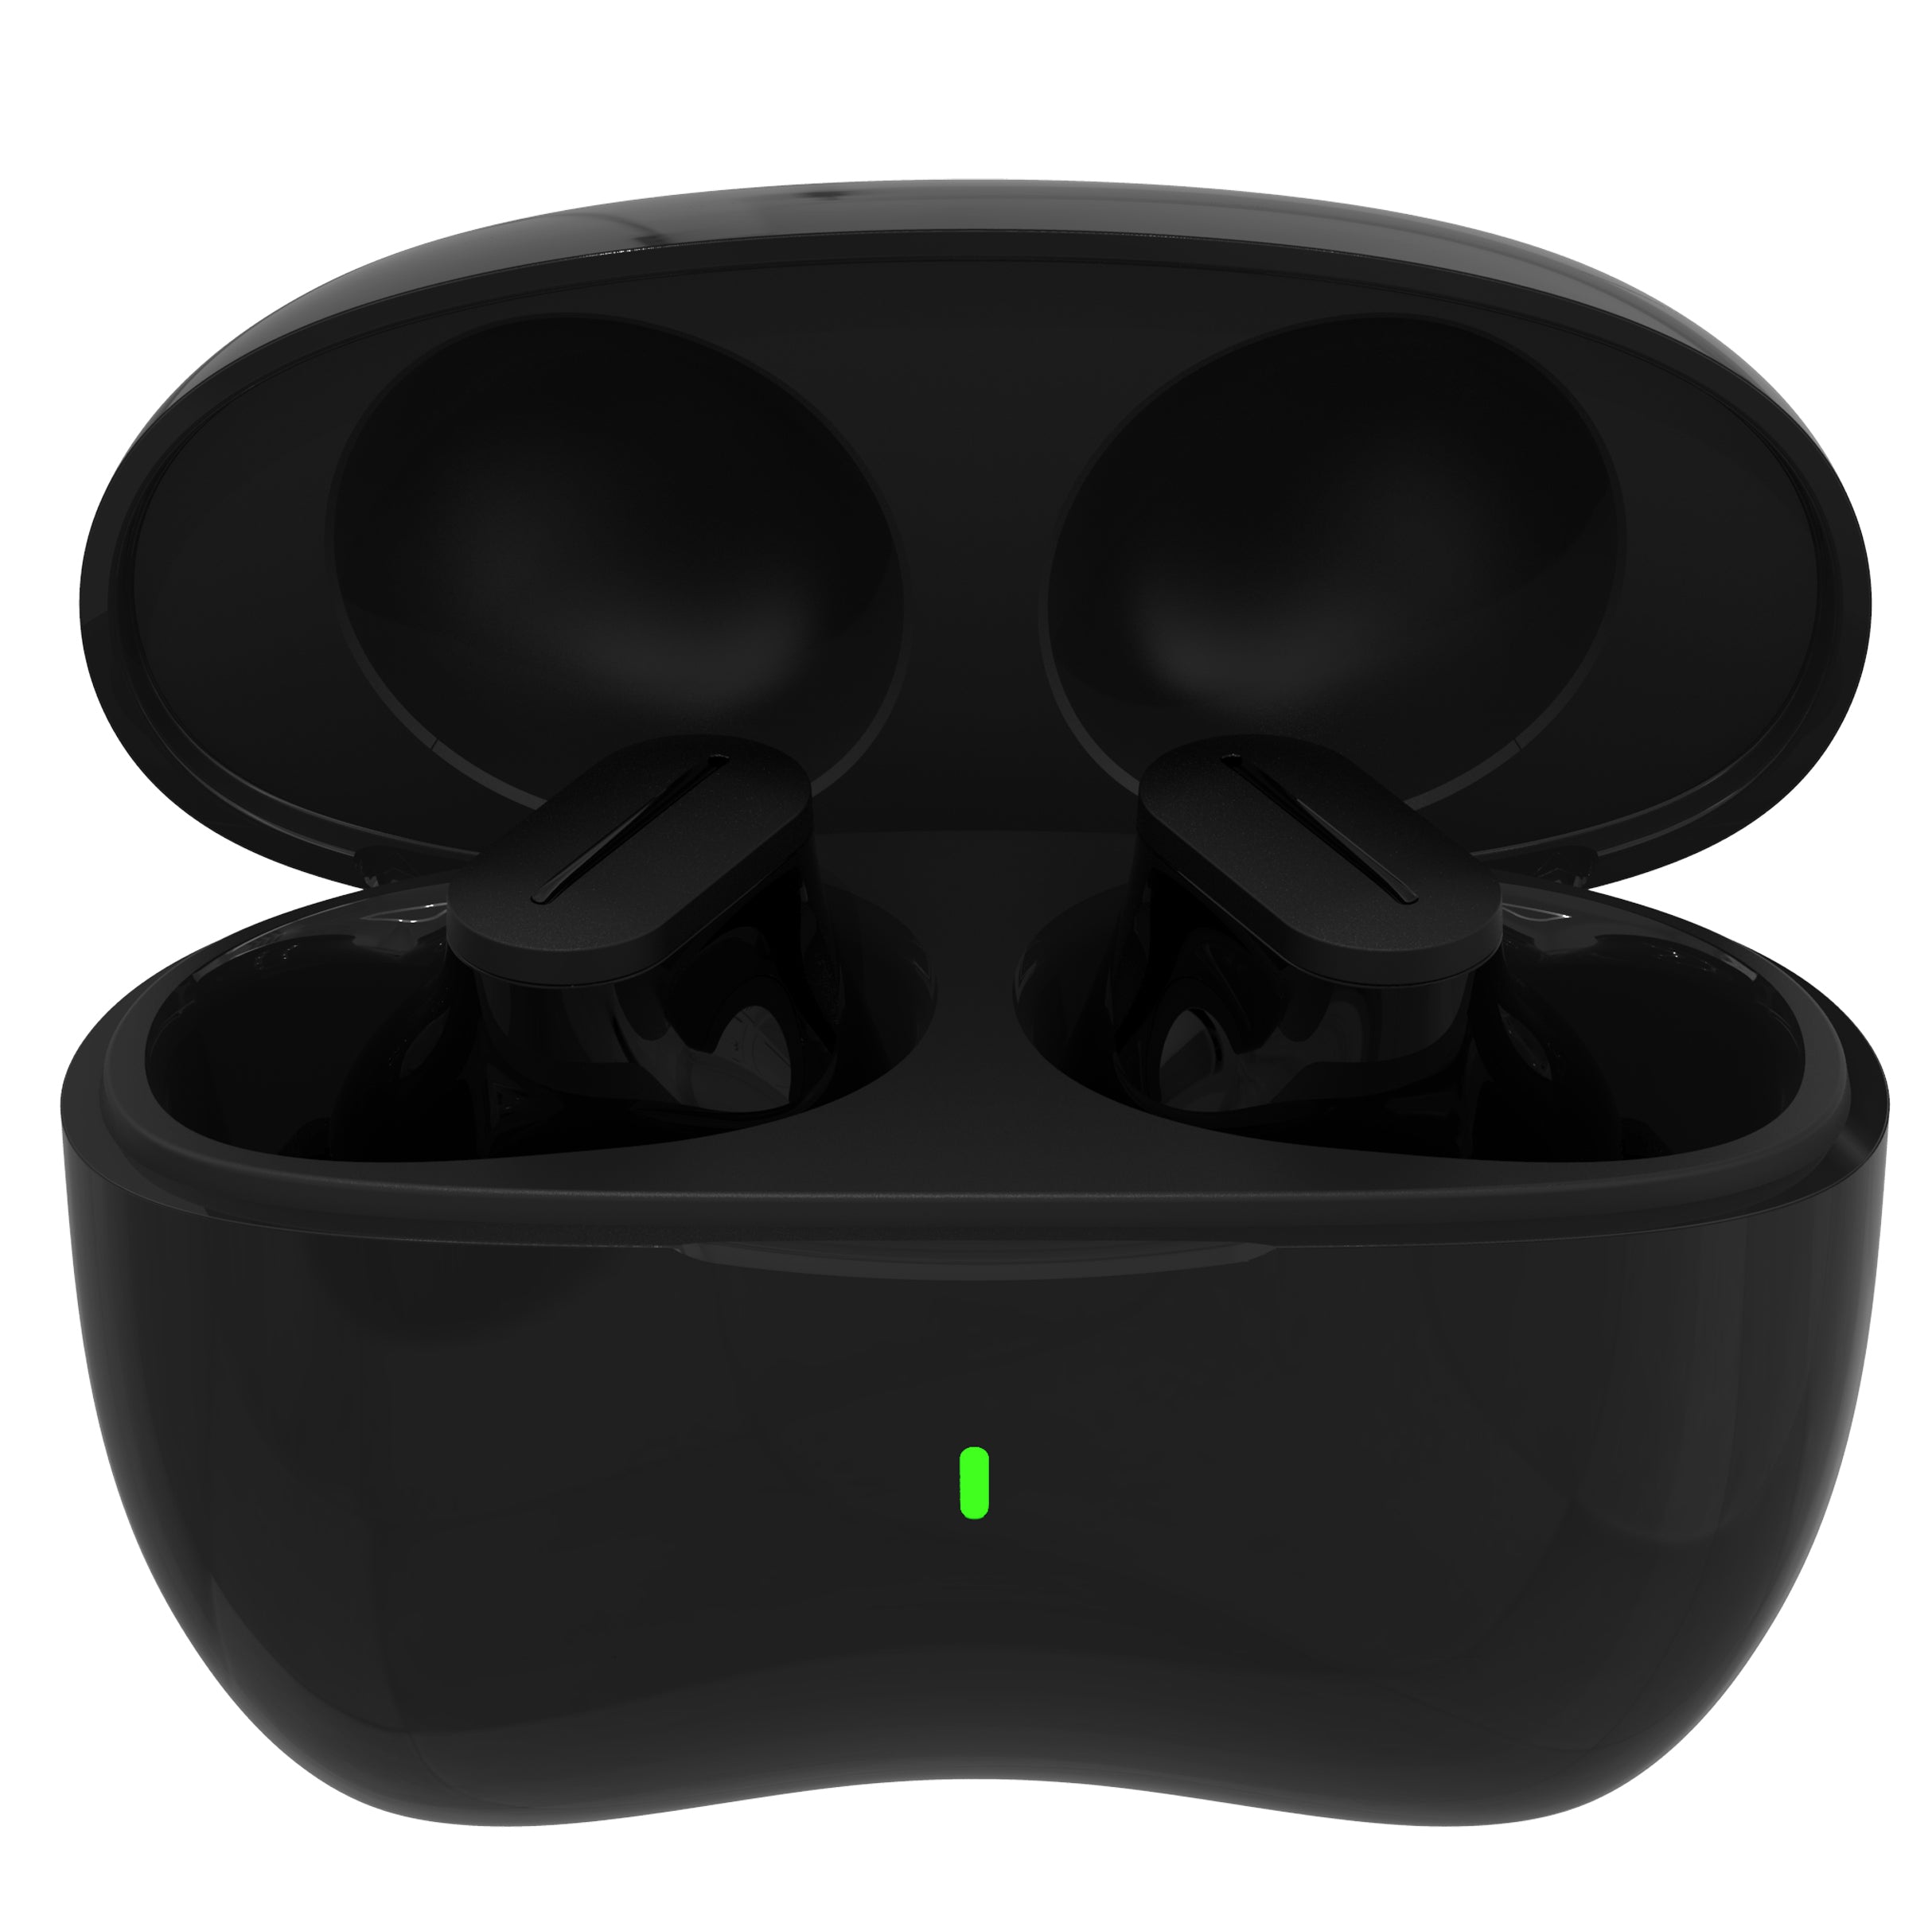 True Wireless Speaker with Inc – Case Earbuds Charging Supersonic